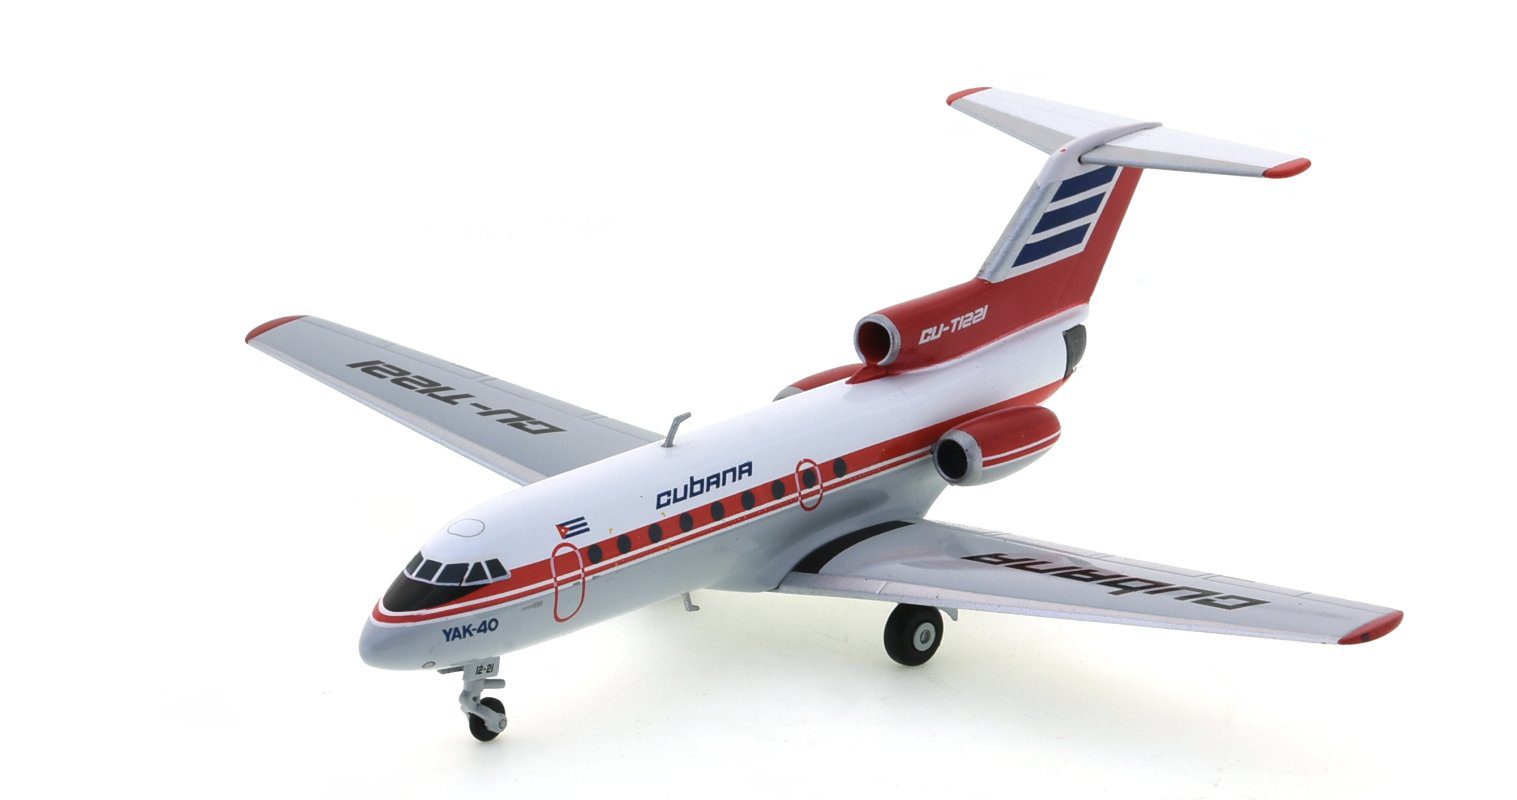 Front port view of Herpa HE559775 - 1/200 scale diecast model of the Yakovlev Yak-40, registration CU-T1221 in the livery of Cubana de Aviacion, circa the 1980s